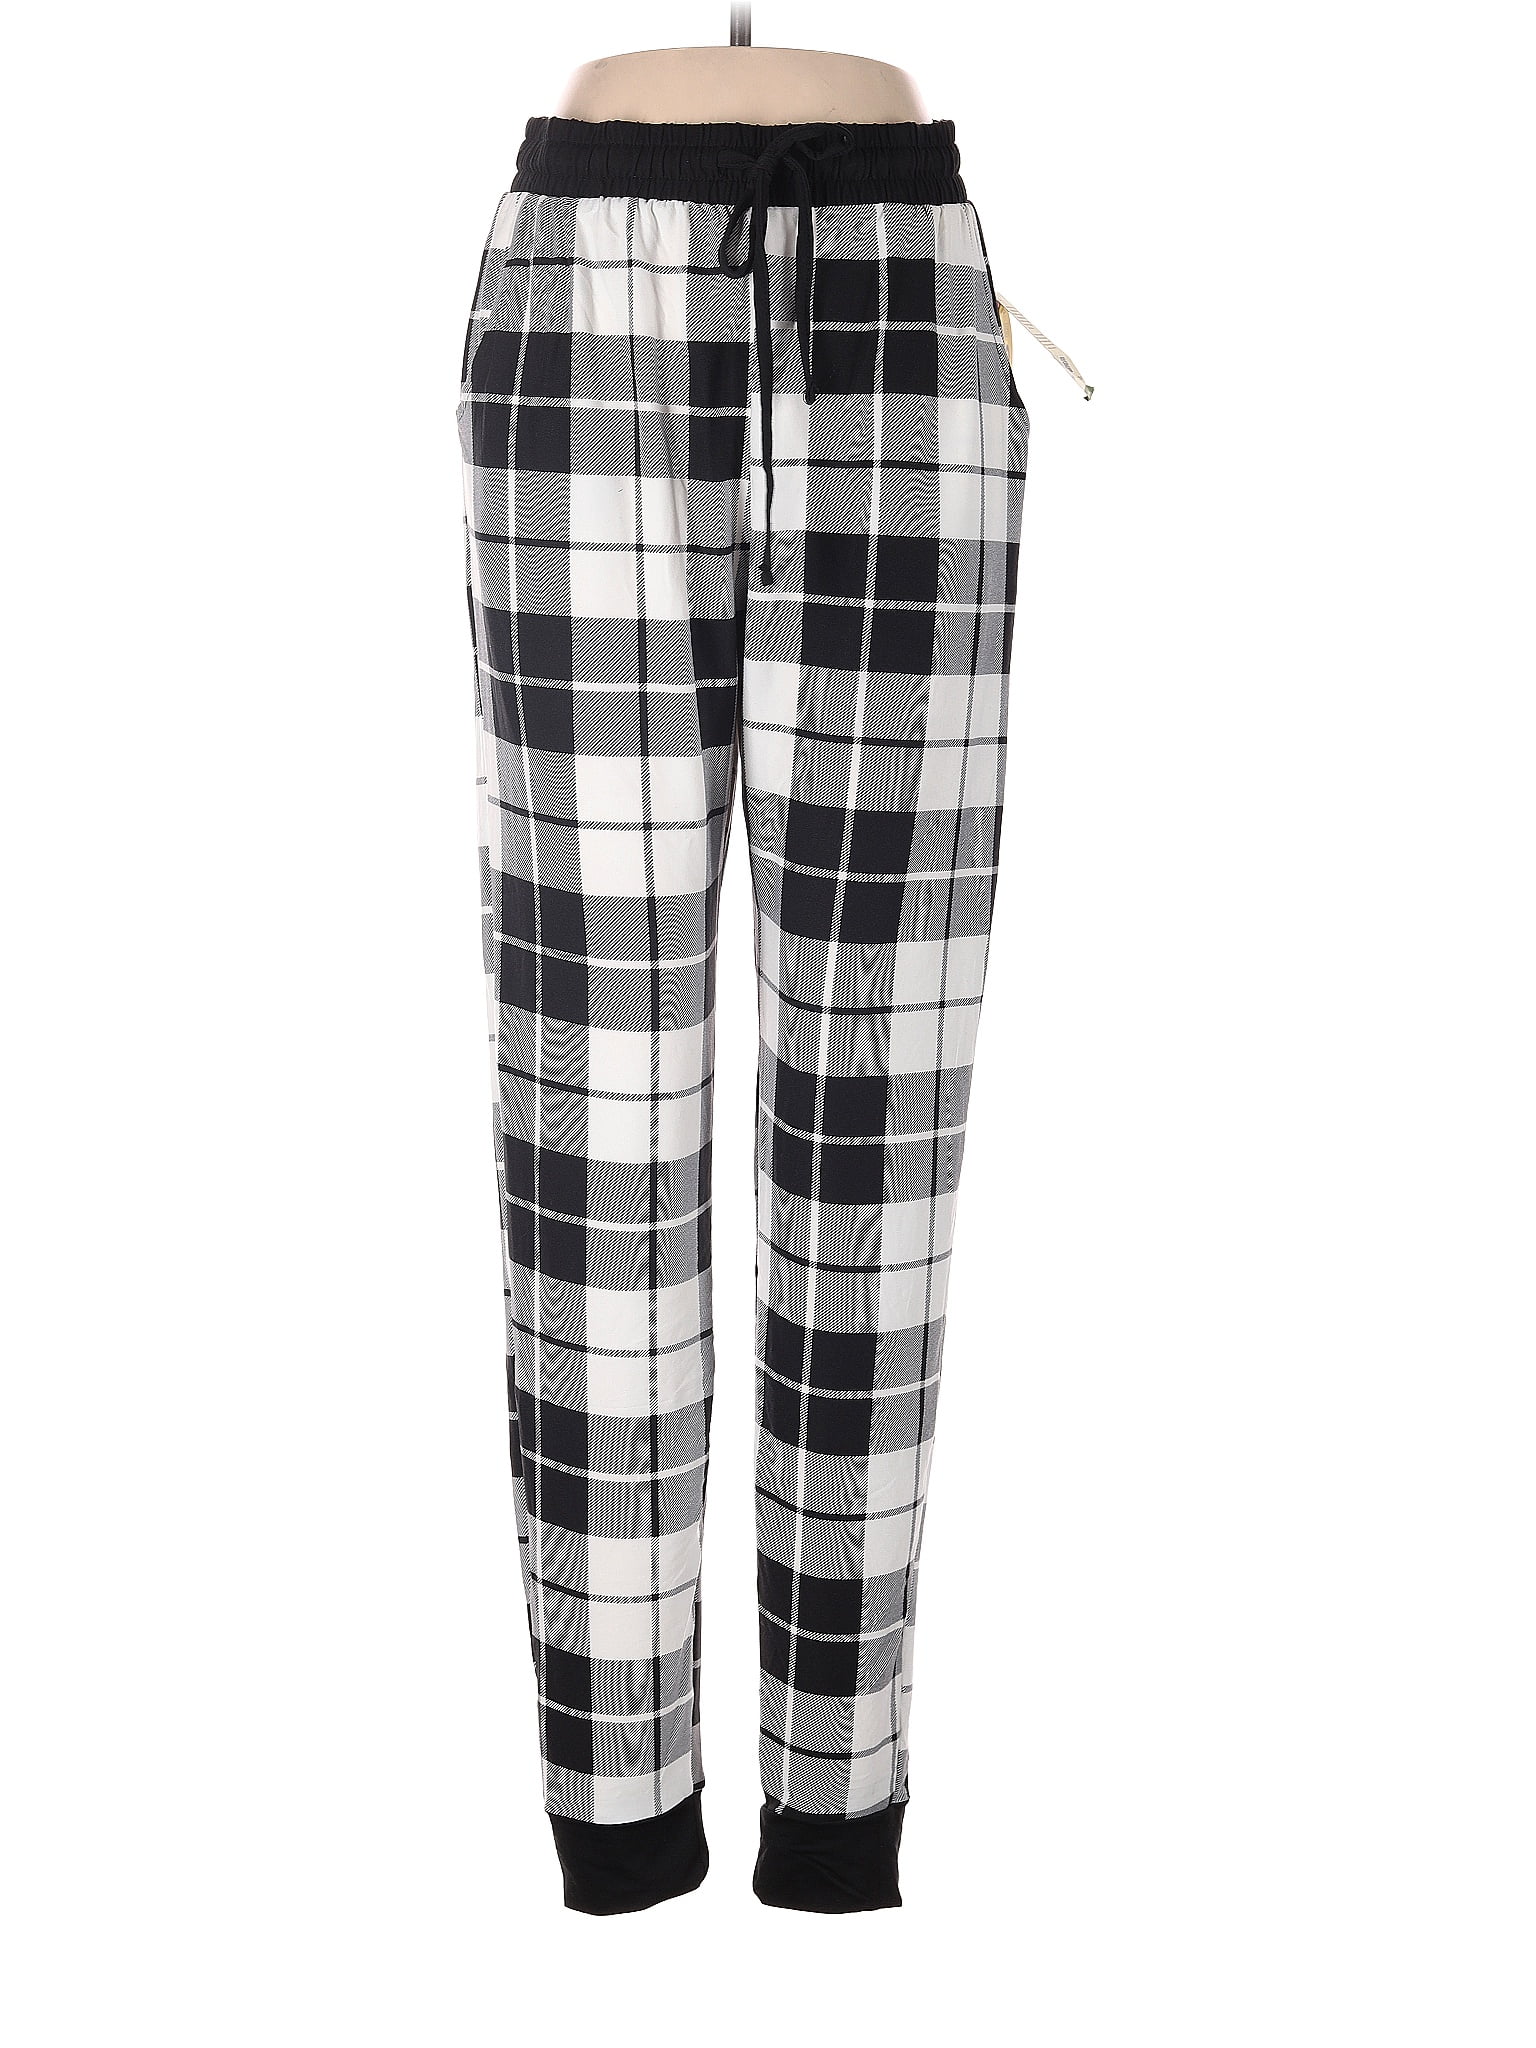 Ardene Women's Pants On Sale Up To 90% Off Retail